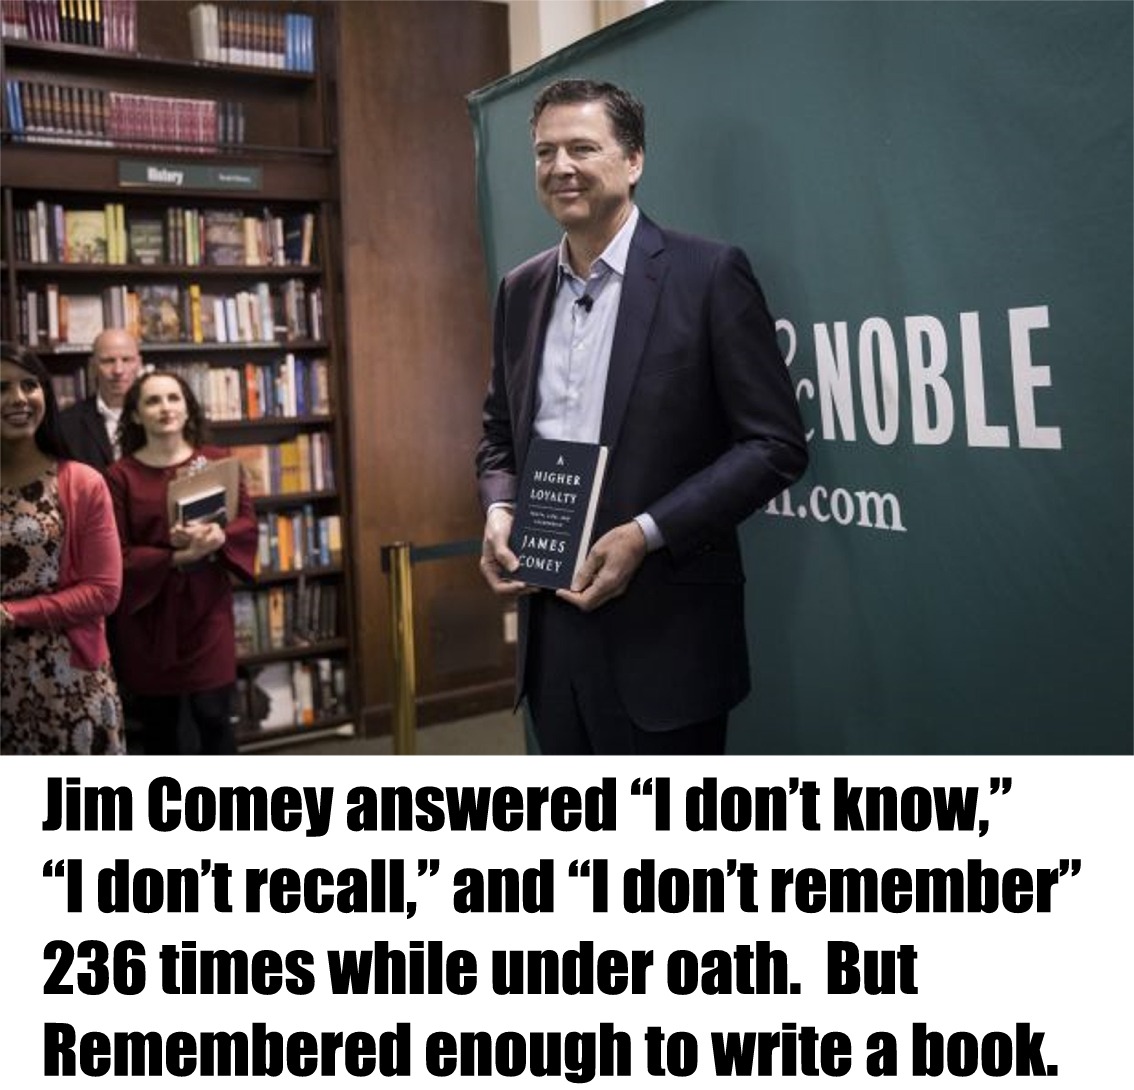 james comey barnes and noble - Noble Higher Loyalty 11.com Janes Comey Jim Comey answered I don't know," "I don't recall," and "I don't remember" 236 times while under oath. But Remembered enough to write a book.